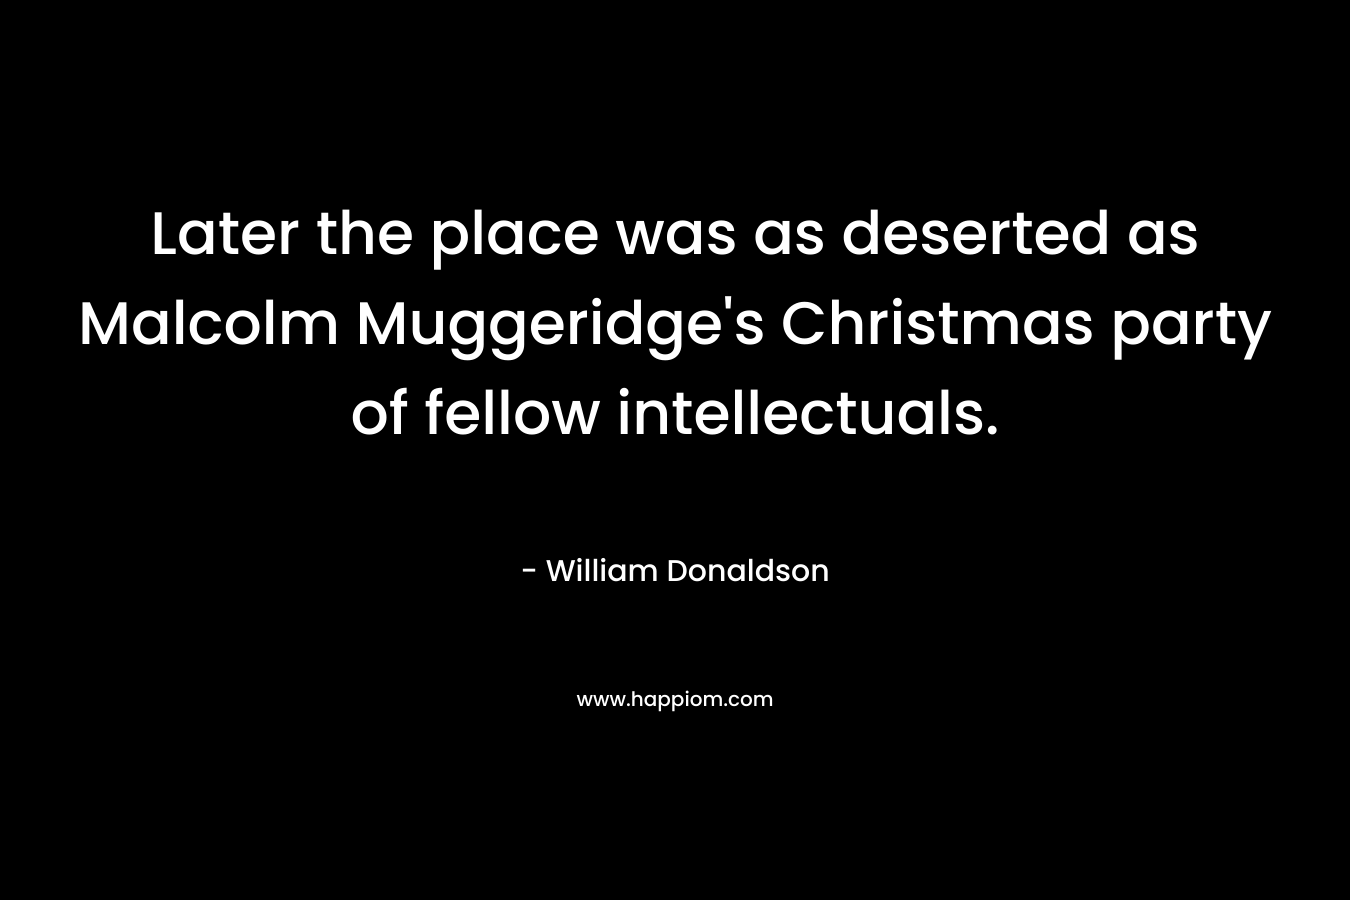 Later the place was as deserted as Malcolm Muggeridge’s Christmas party of fellow intellectuals. – William Donaldson